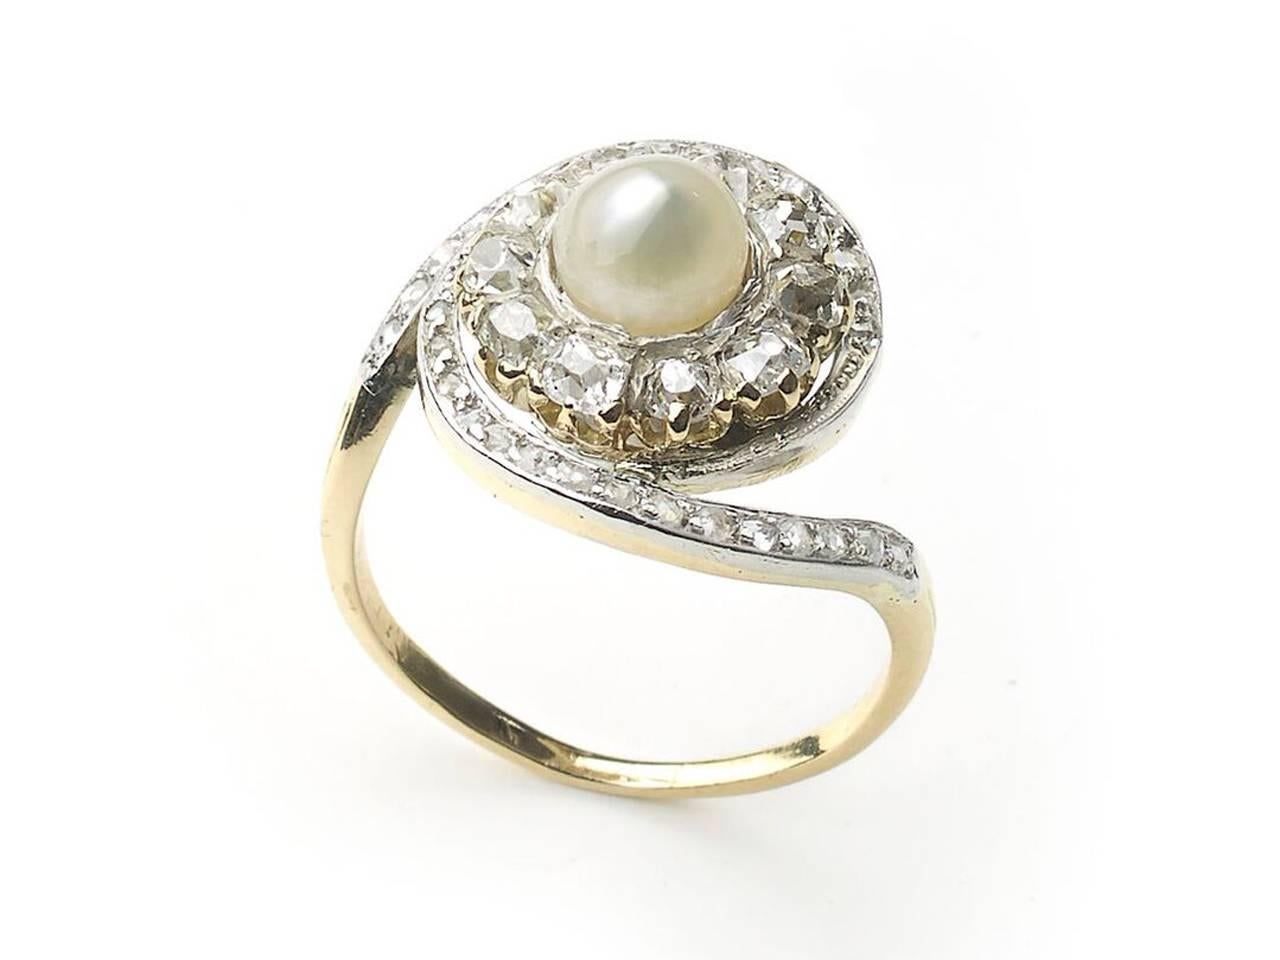 A French, antique, natural pearl ring, with a cluster surround of ten old-cut diamonds, in claw settings, with a swirling surround of rose-cut diamonds, in grain settings, with millegrain edges, set in silver-upon-gold, with a gold shank, with three